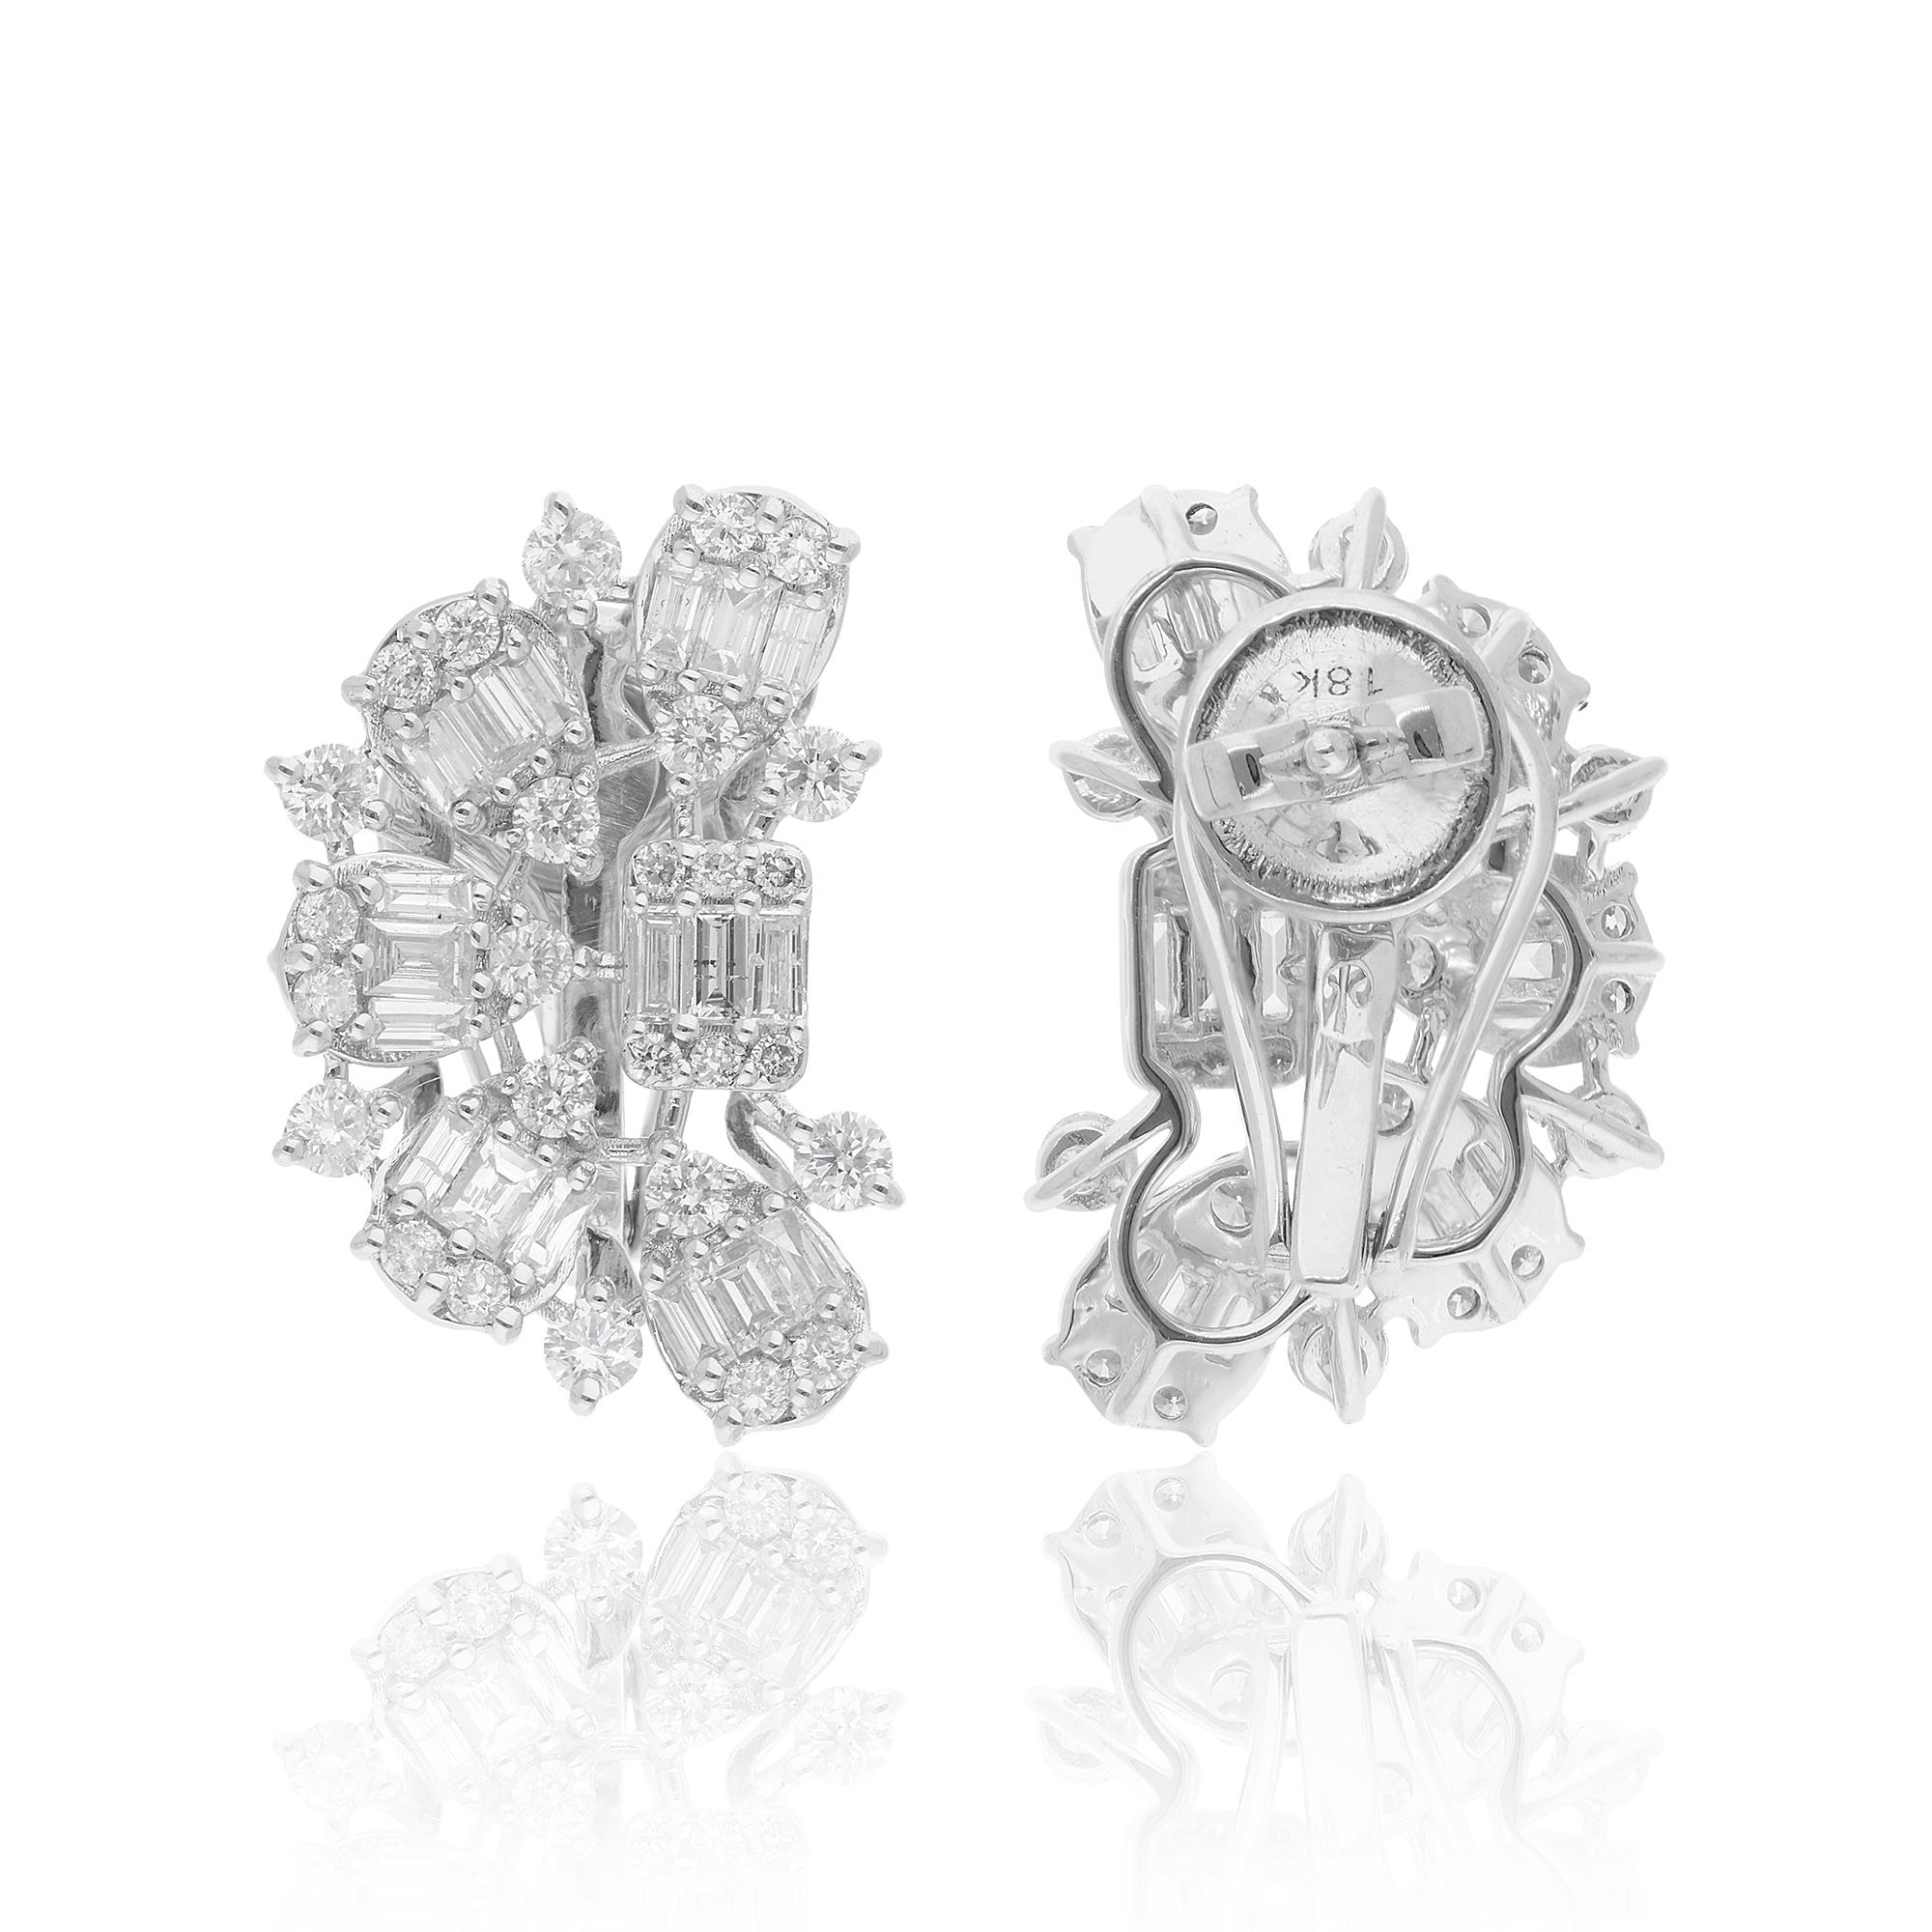 Introducing a dazzling showcase of artisan craftsmanship and timeless elegance: the 2 Carat Baguette & Round Diamond Earrings, meticulously handcrafted in luxurious 18 Karat White Gold. These exquisite earrings are a stunning testament to